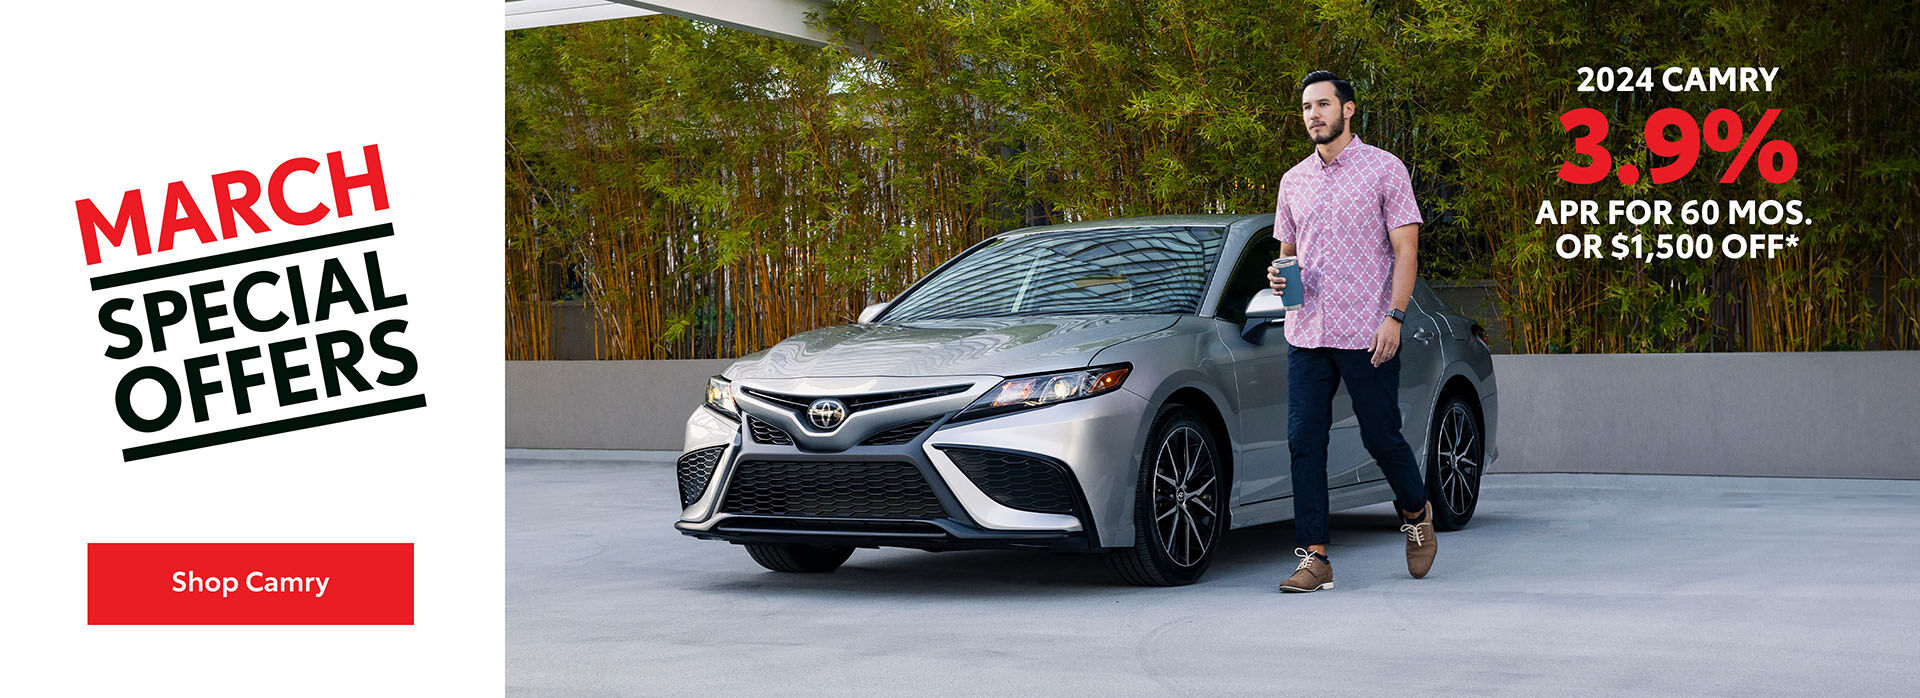 March Specials - 3.9% APR for 60 months or $1,500 off a 2024 Camry